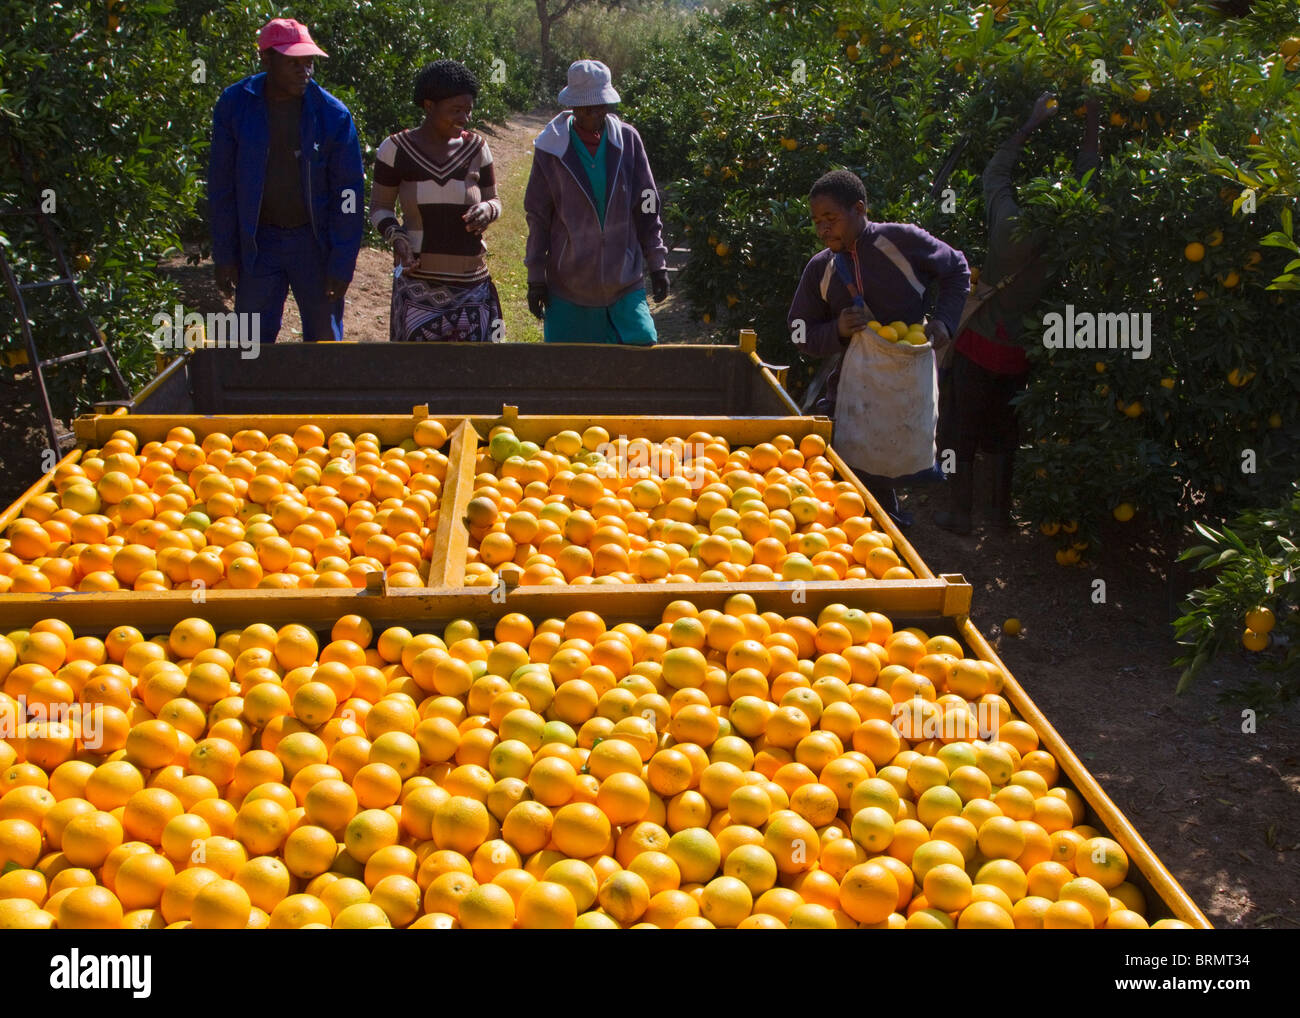 Workers loading freshly picked oranges onto a trailer in the orchard Stock Photo